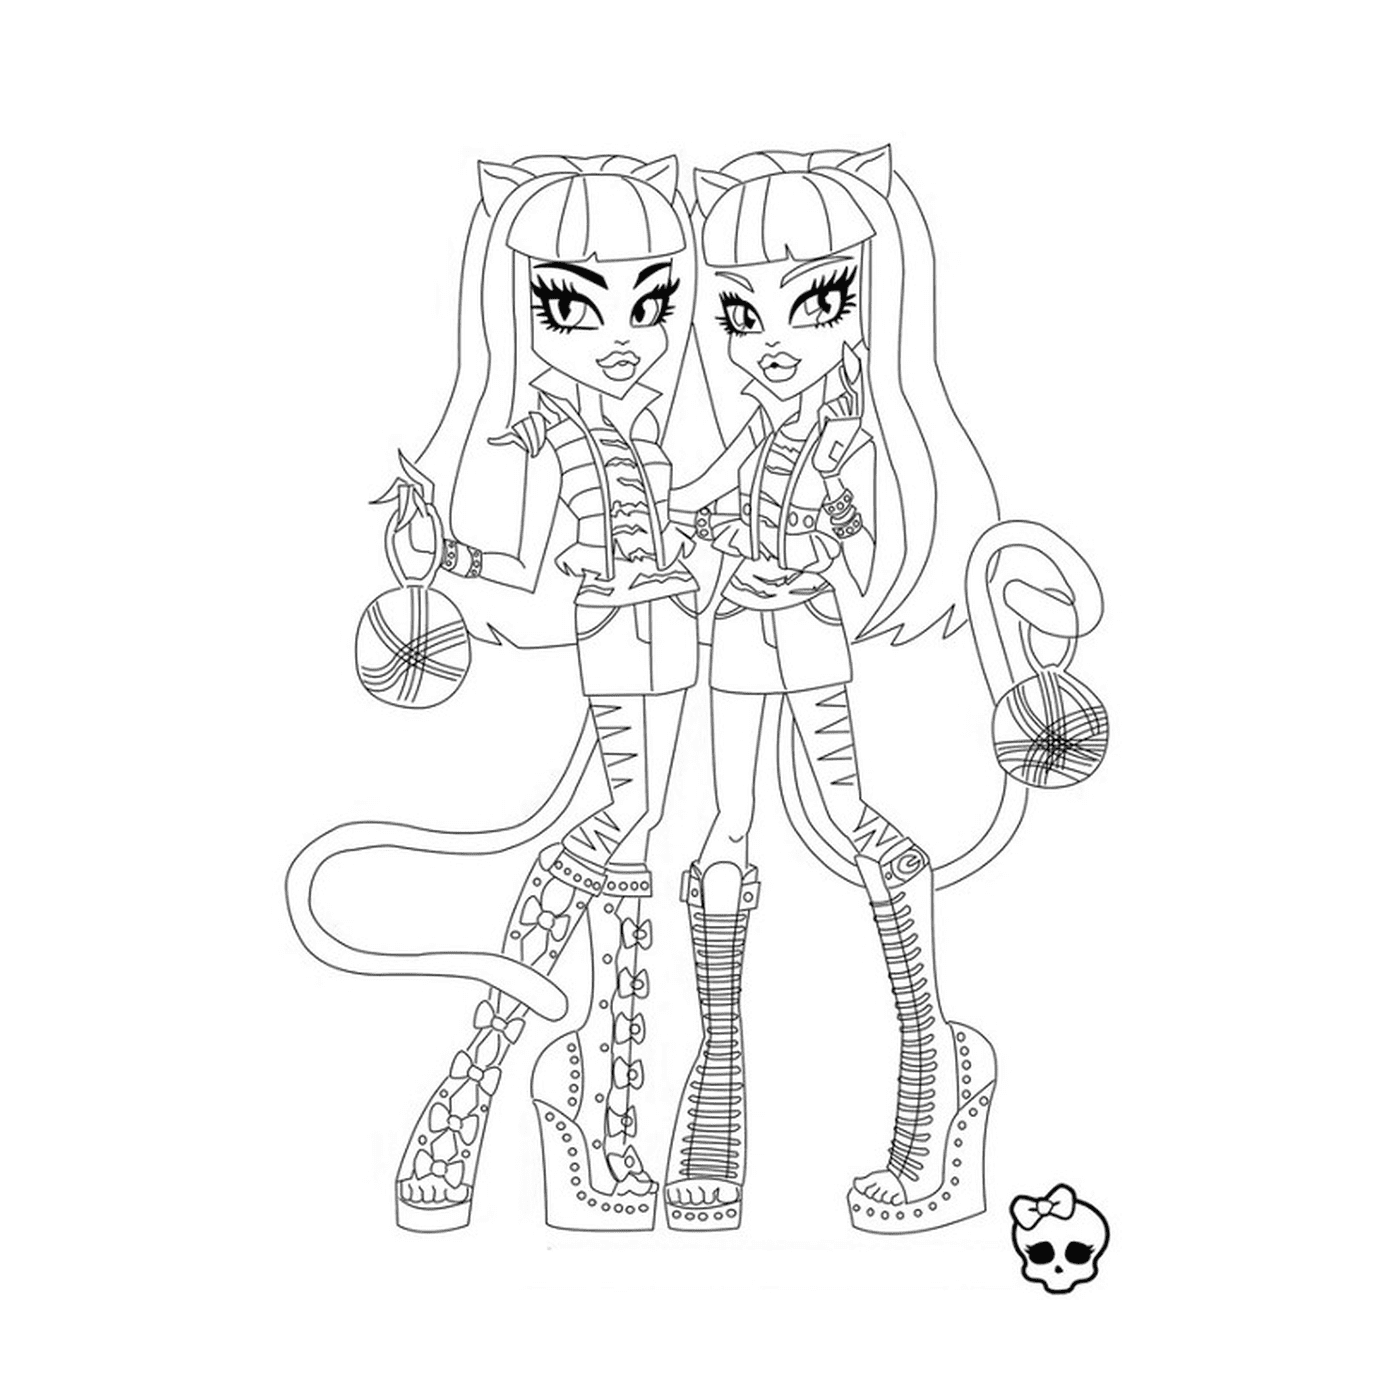  Meowlodie and Purrsephone two dolls 